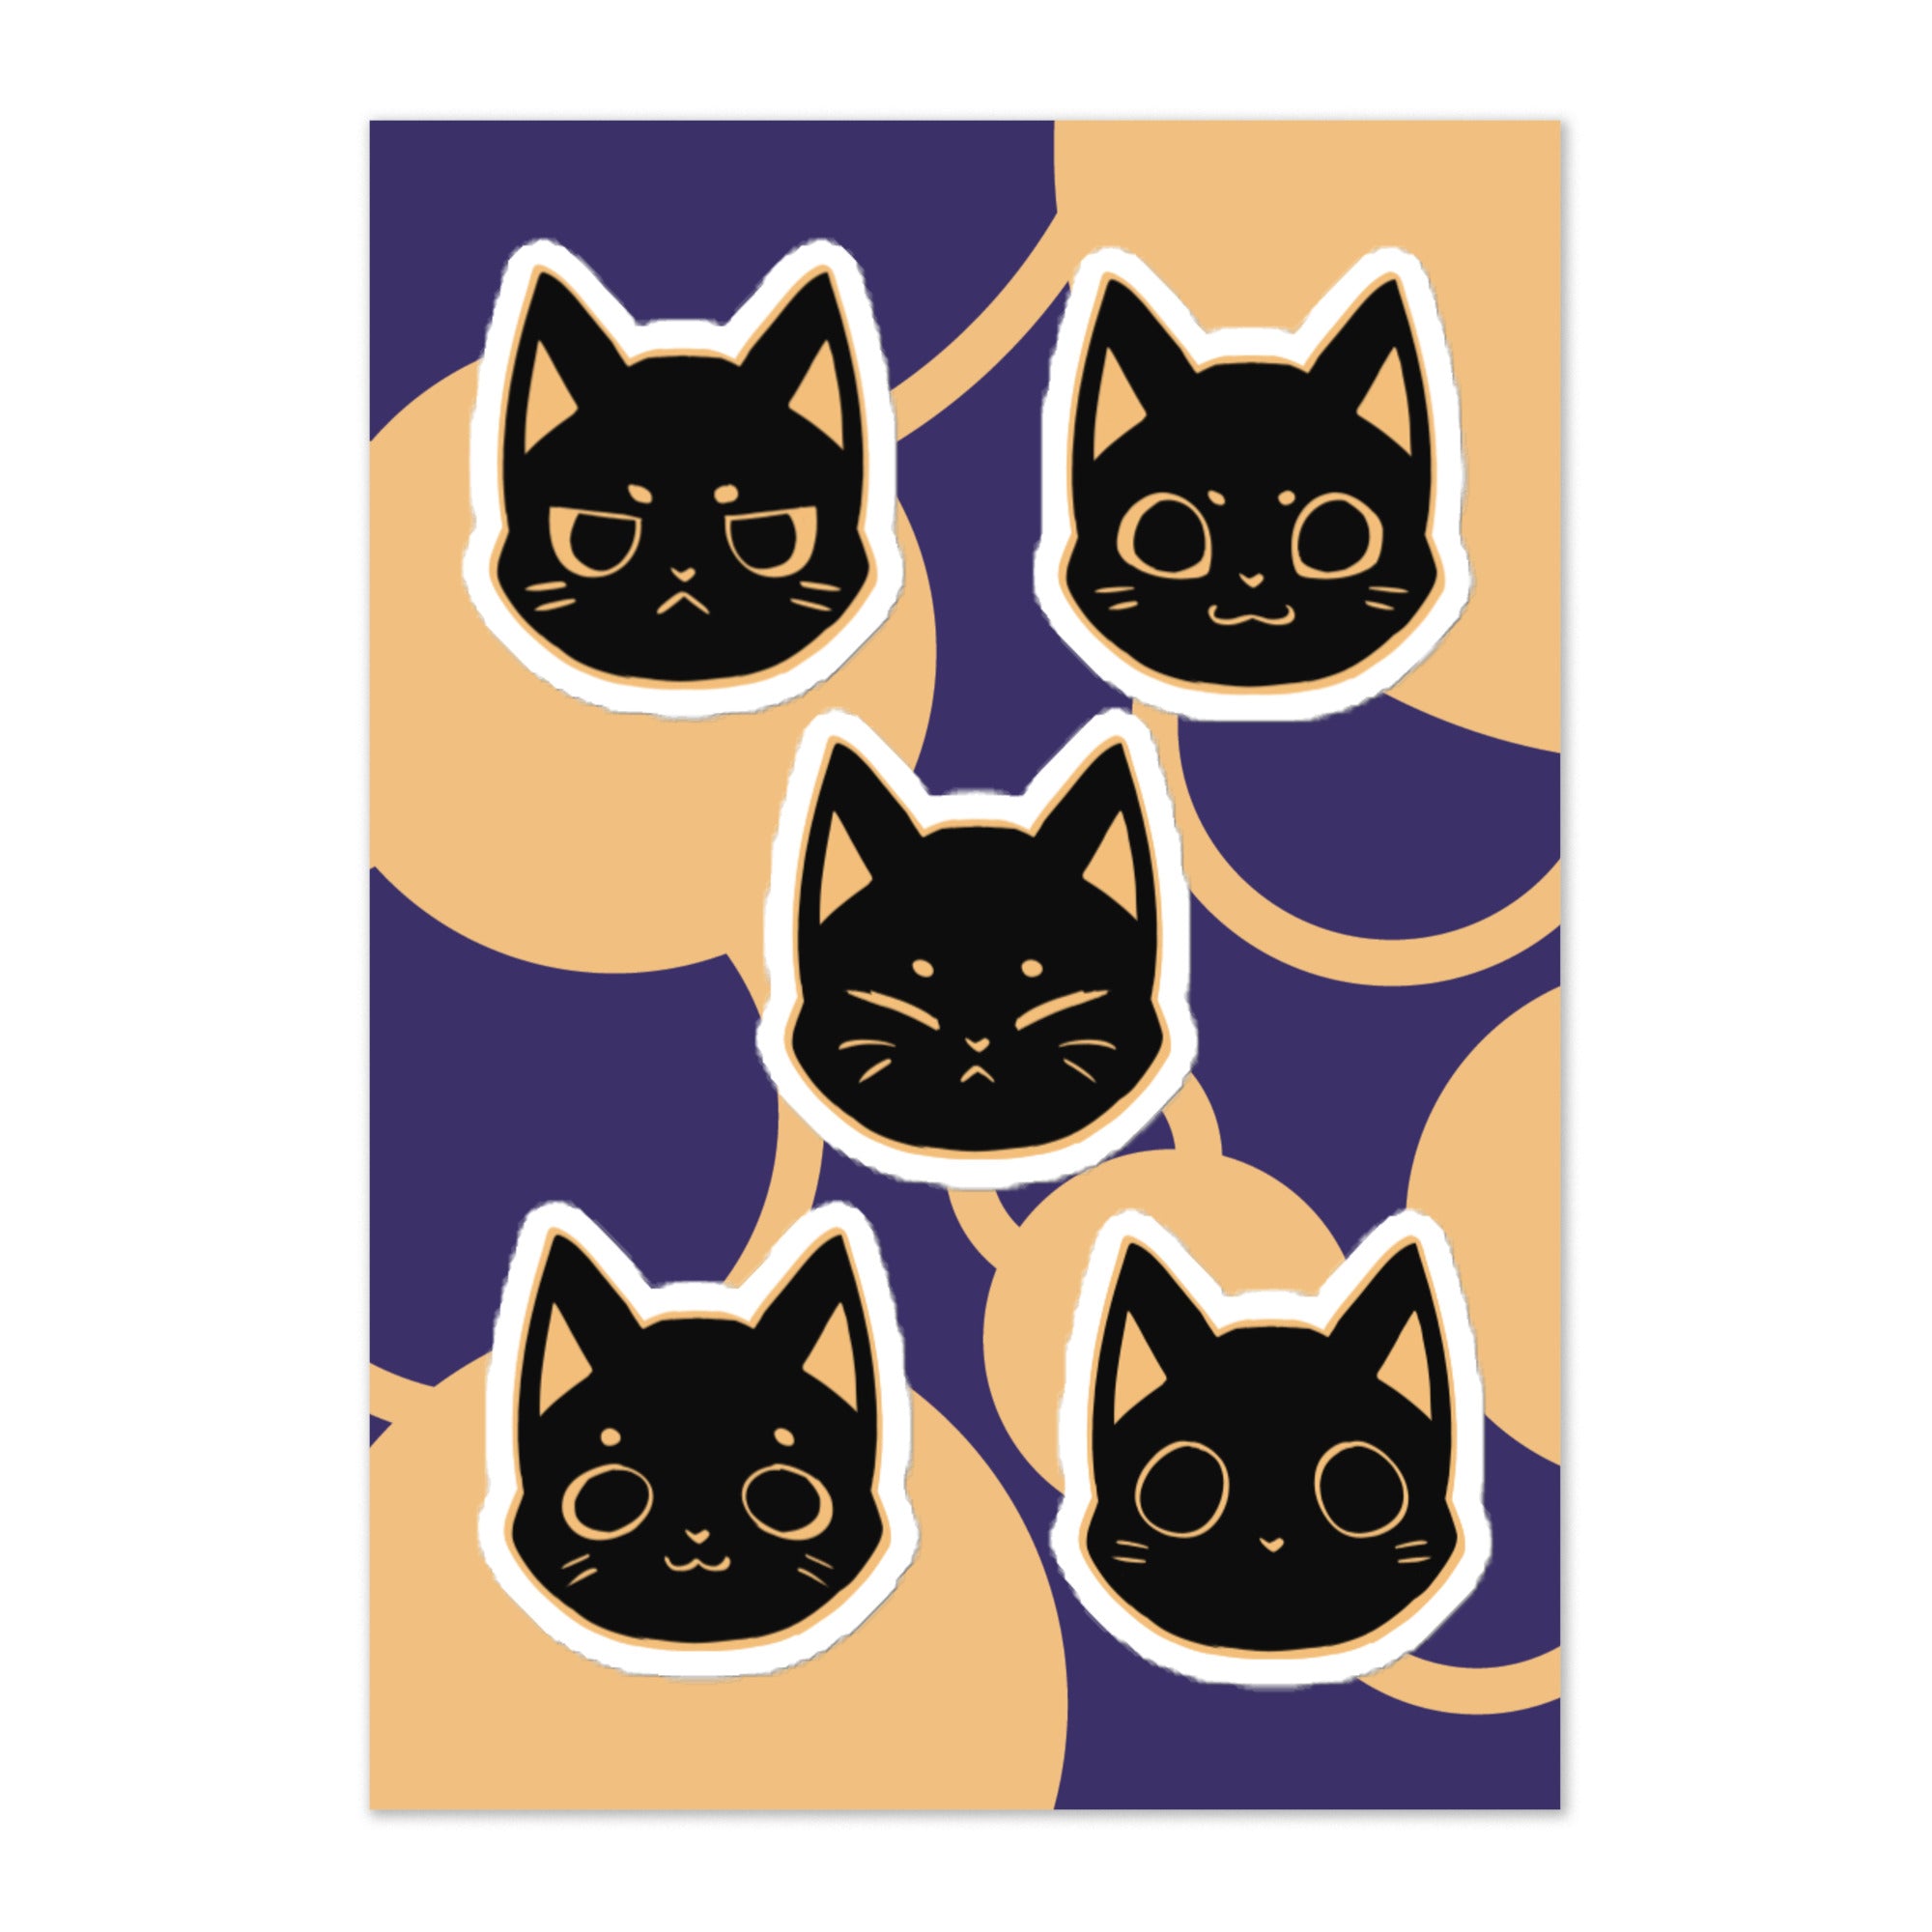 Daily meow • stickers - Jackler - anime-inspired streetwear - anime clothing